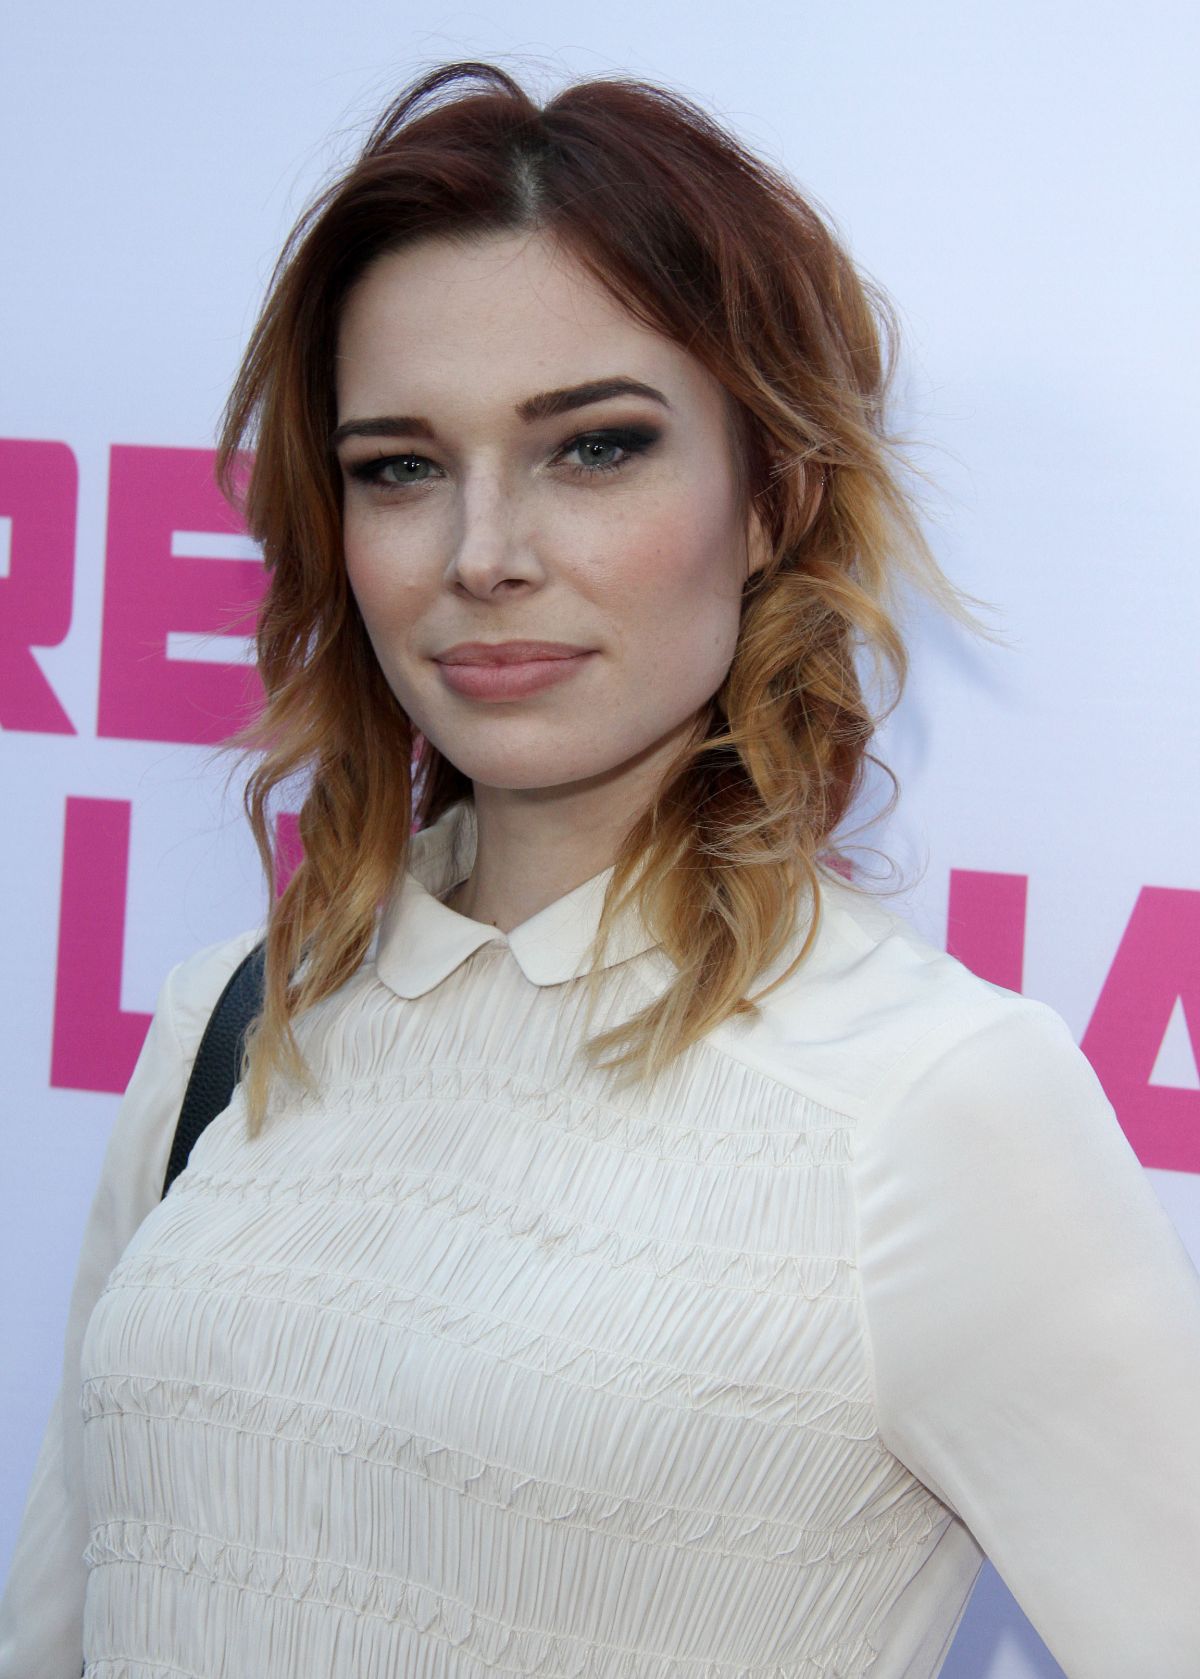 CHLOE DYKSTRA at Barely Lethal Premiere in Los Angeles.